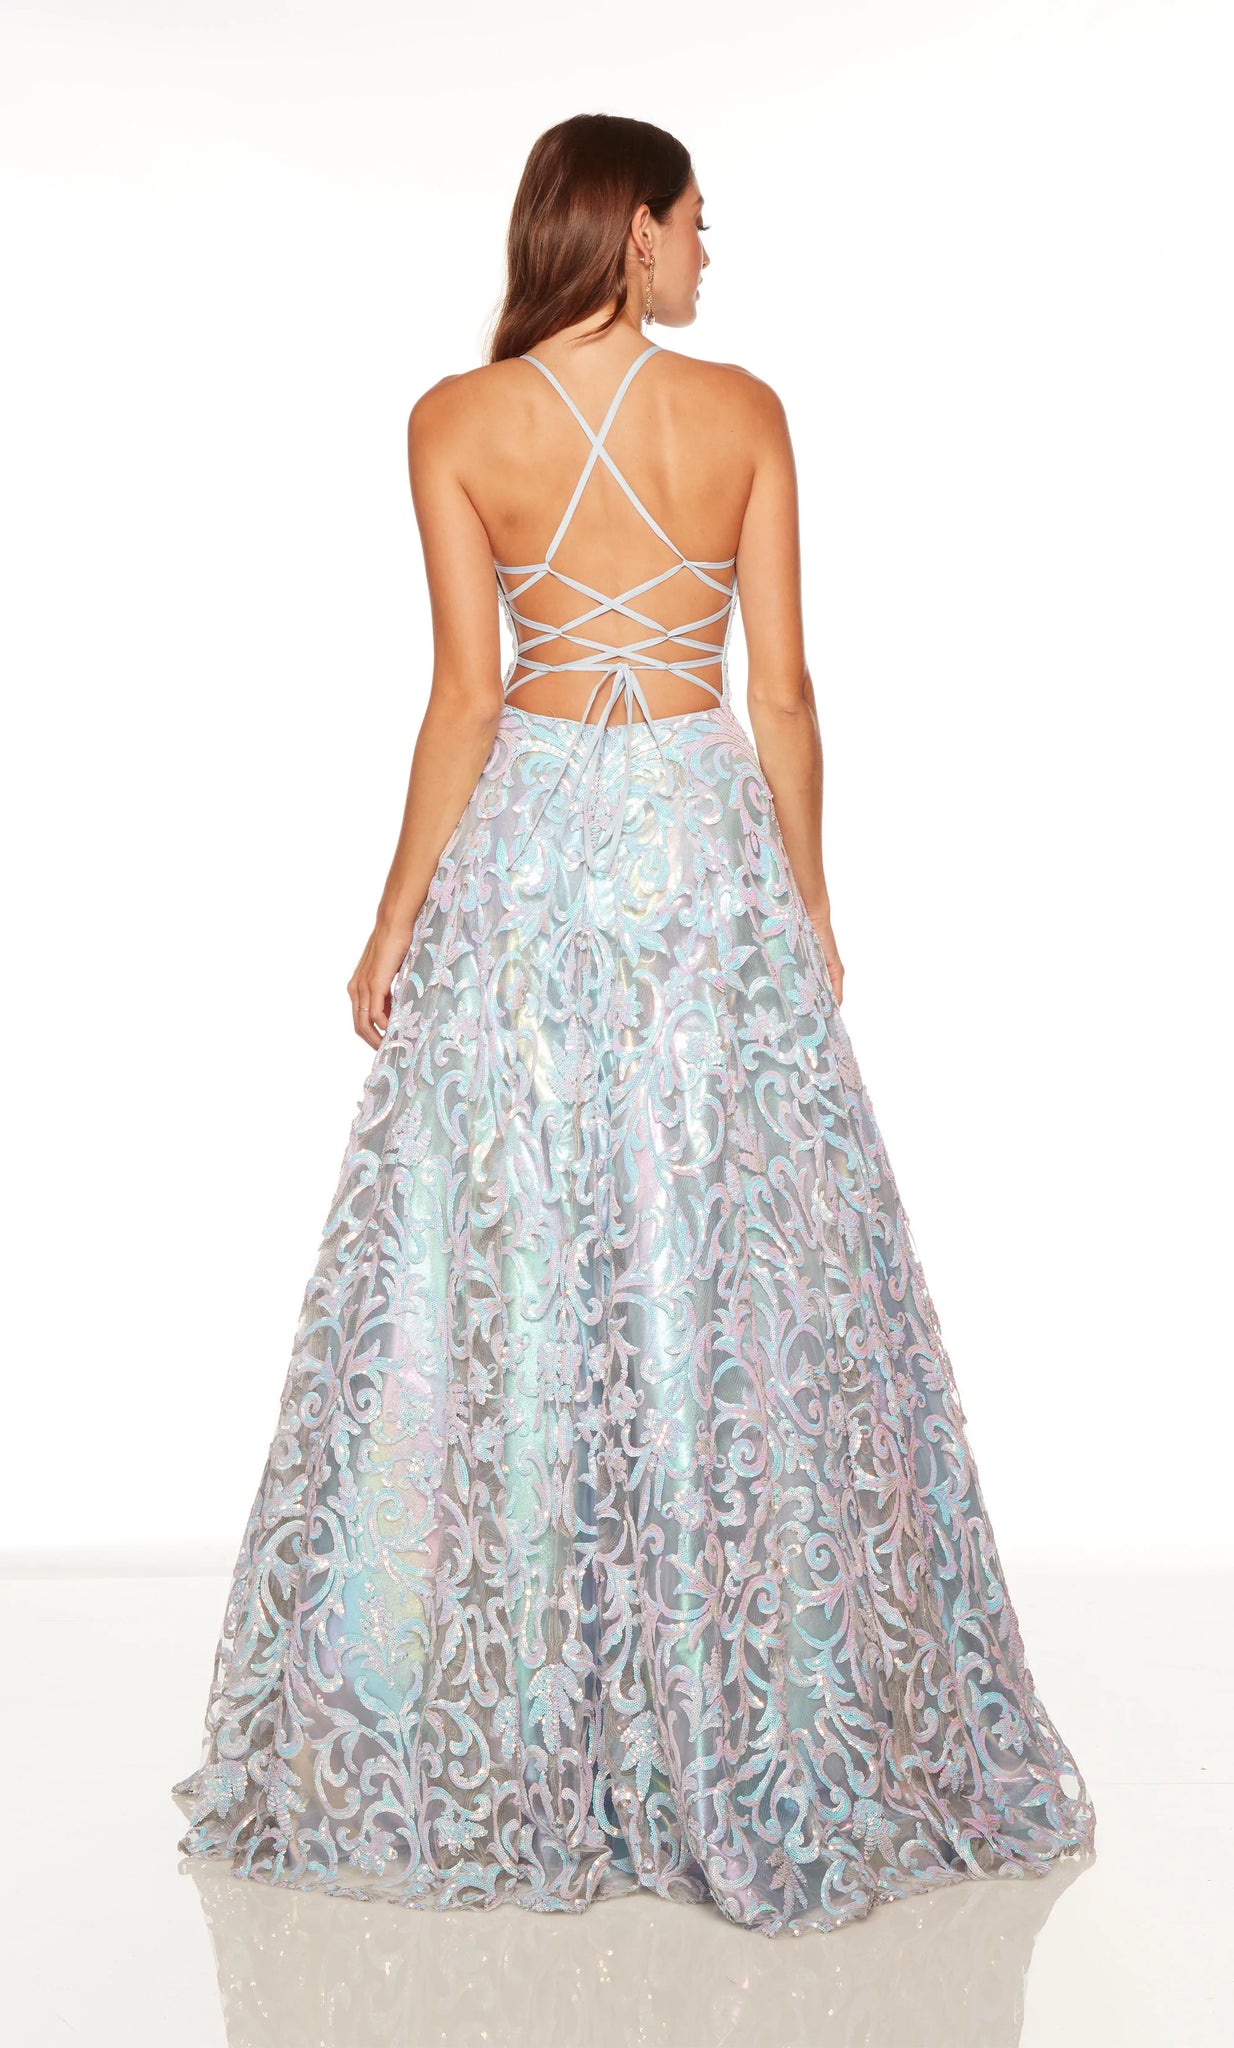 Look like a modern day princess at prom in this stunning long Alyce Paris long dress 61291 embellished with shimmering sequins throughout. This glamorous gown showcases a fitted V neckline bodice with illusion insert, spaghetti straps and open lace up tie back. The long a line skirt flows beautifully to the floor.